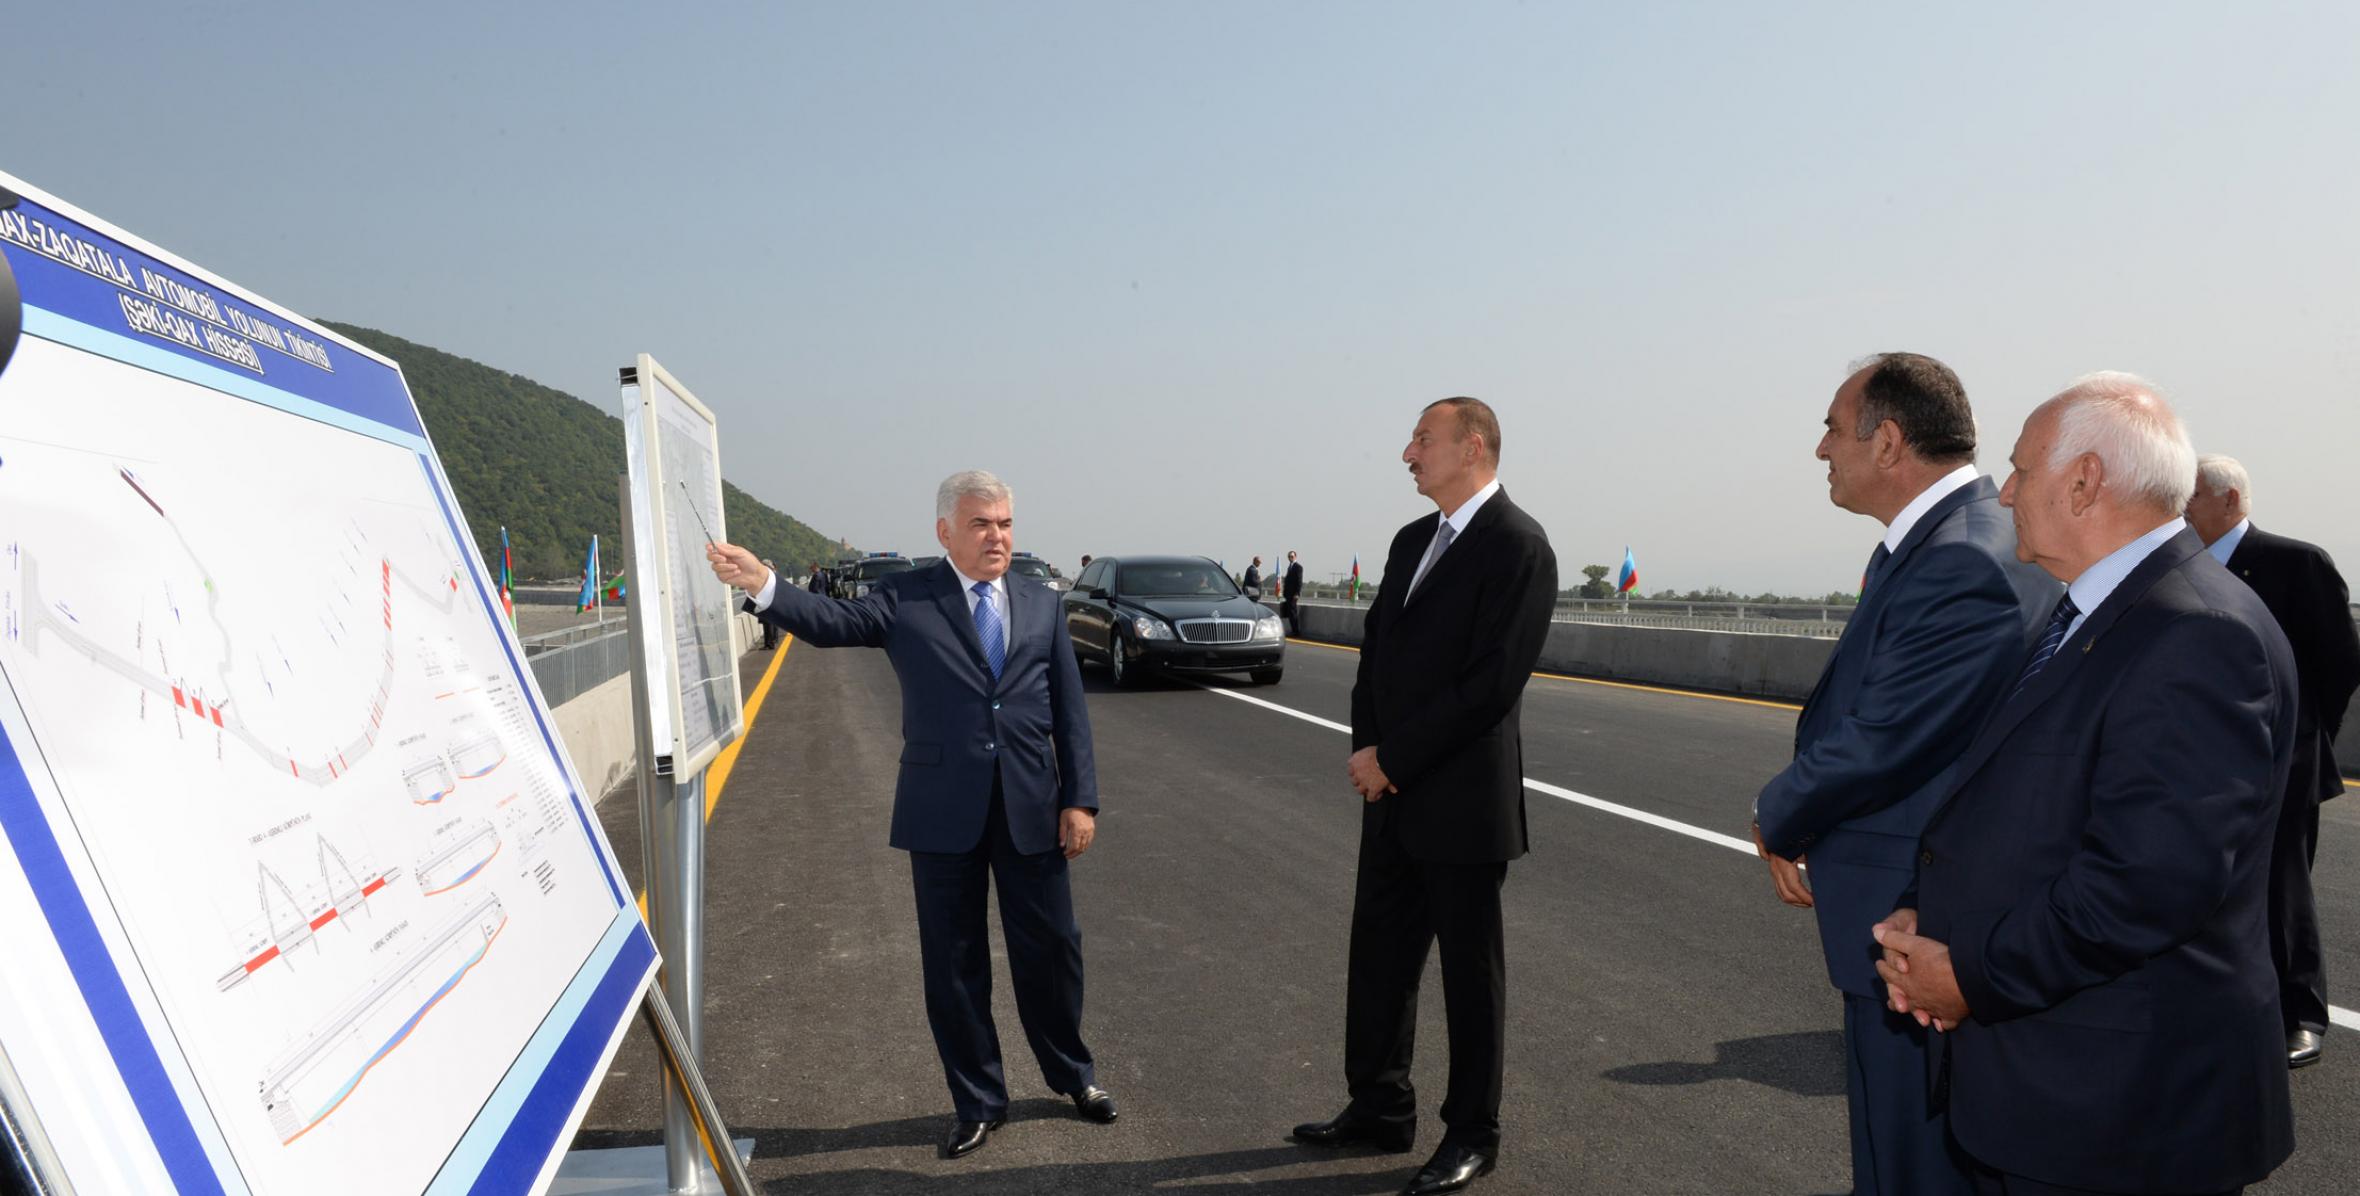 Ilham Aliyev attended the opening of the Shaki-Gakh section of the reconstructed Shaki-Gakh-Zagatala highway